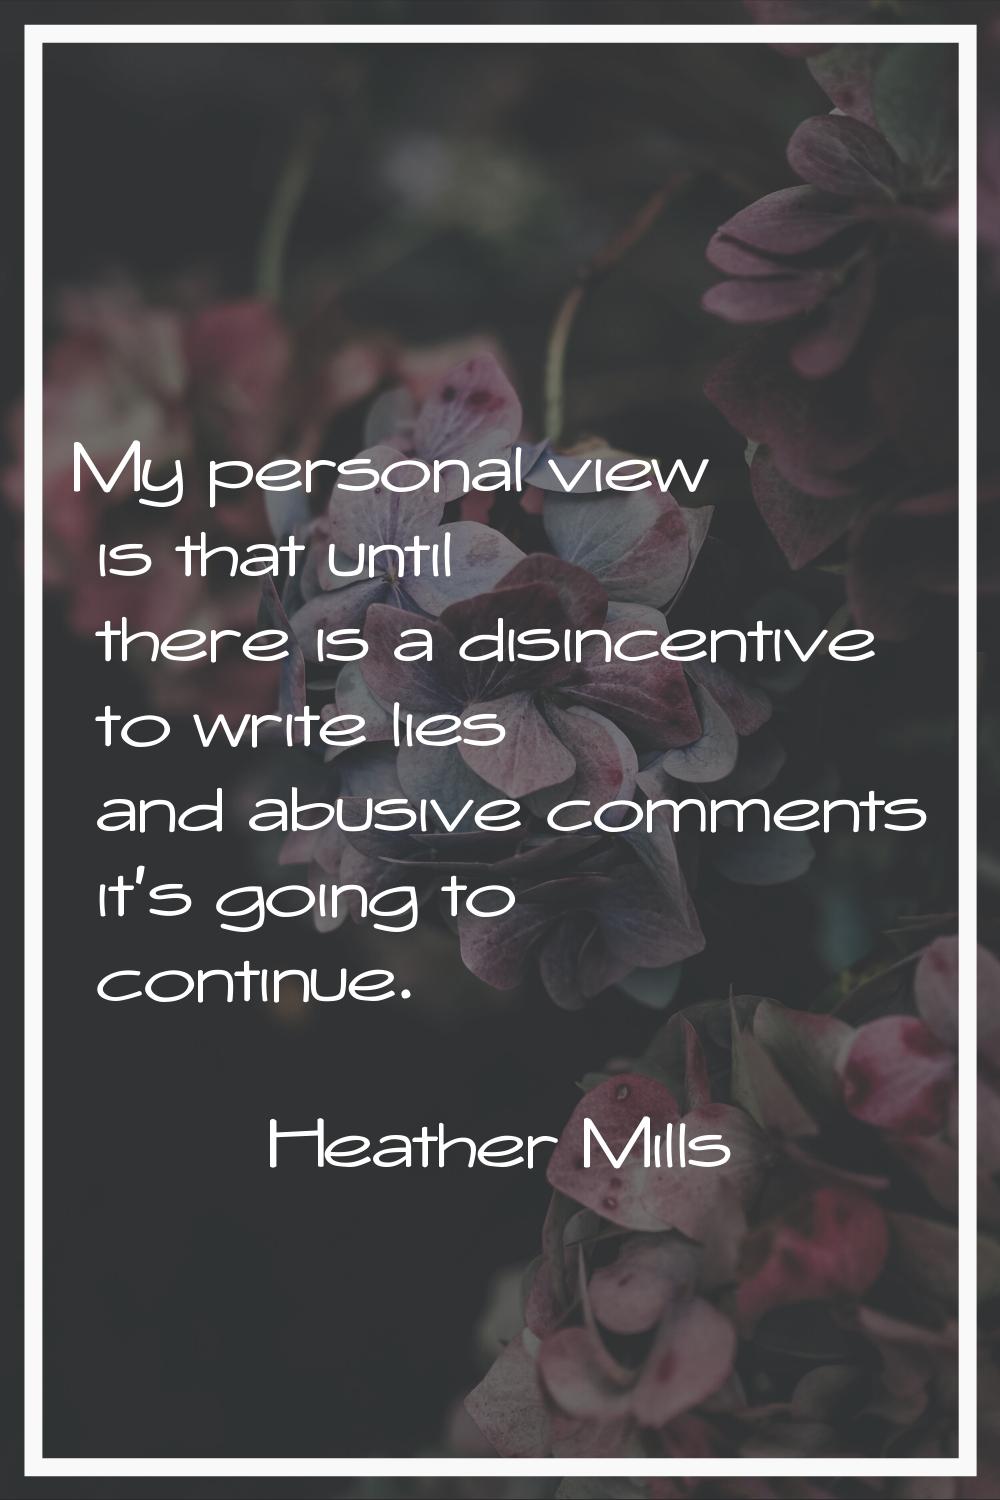 My personal view is that until there is a disincentive to write lies and abusive comments it's goin